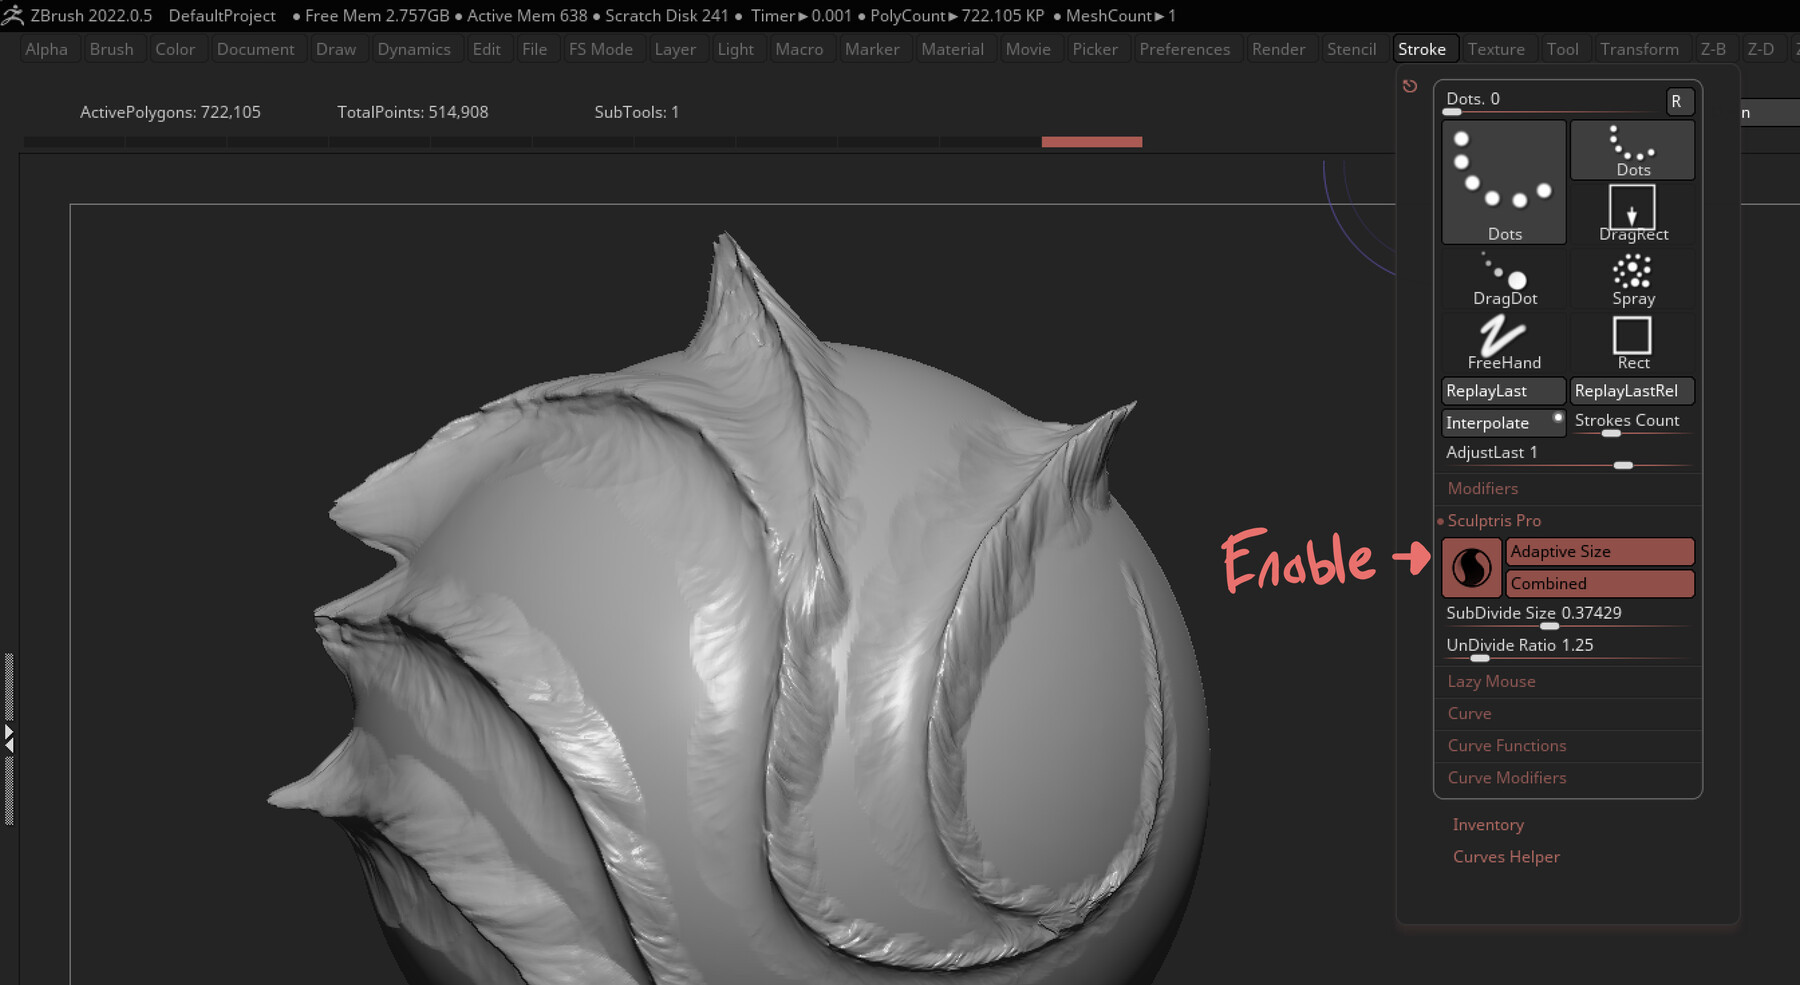 sculptris brushes the same as zbrush